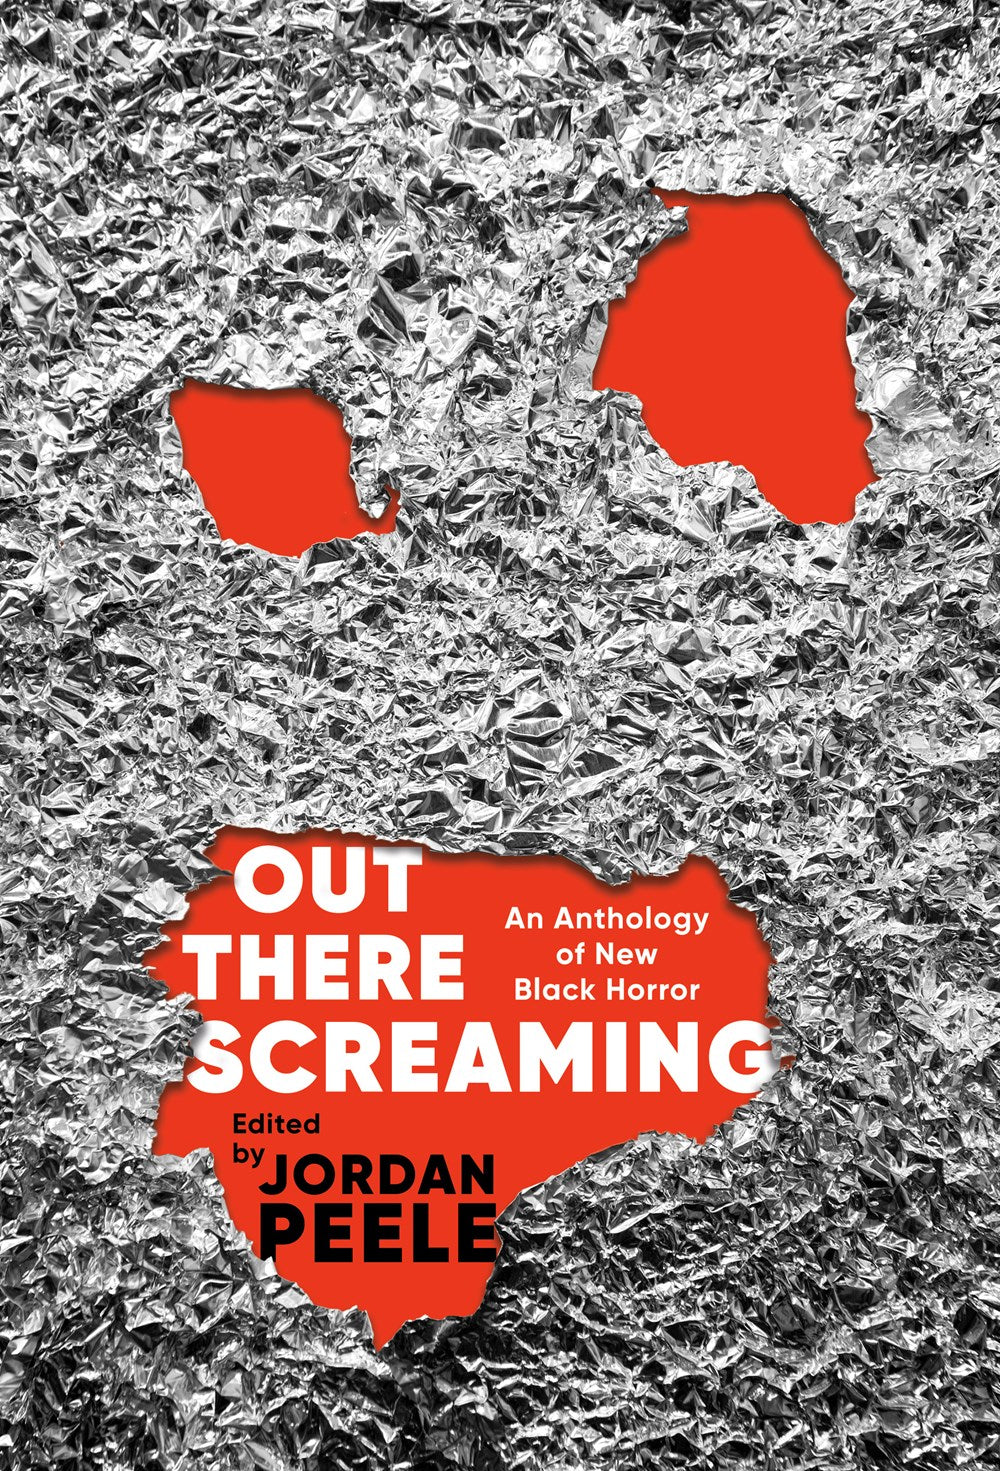 PRE-ORDER: Out There Screaming: An Anthology of New Black Horror